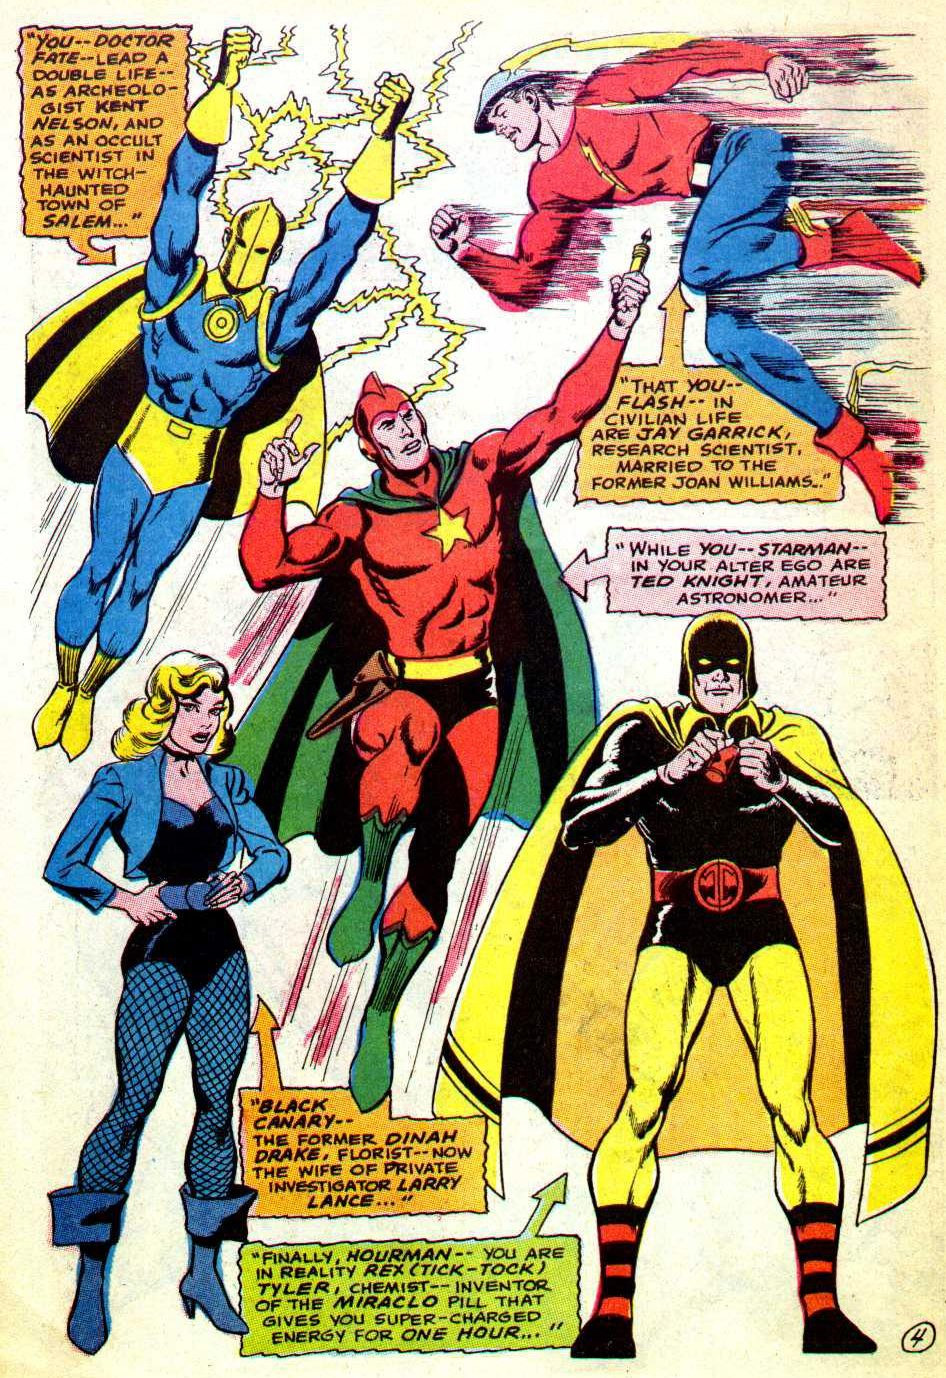 Doctor Fate and the JSA, appearing in Justice League of America #64